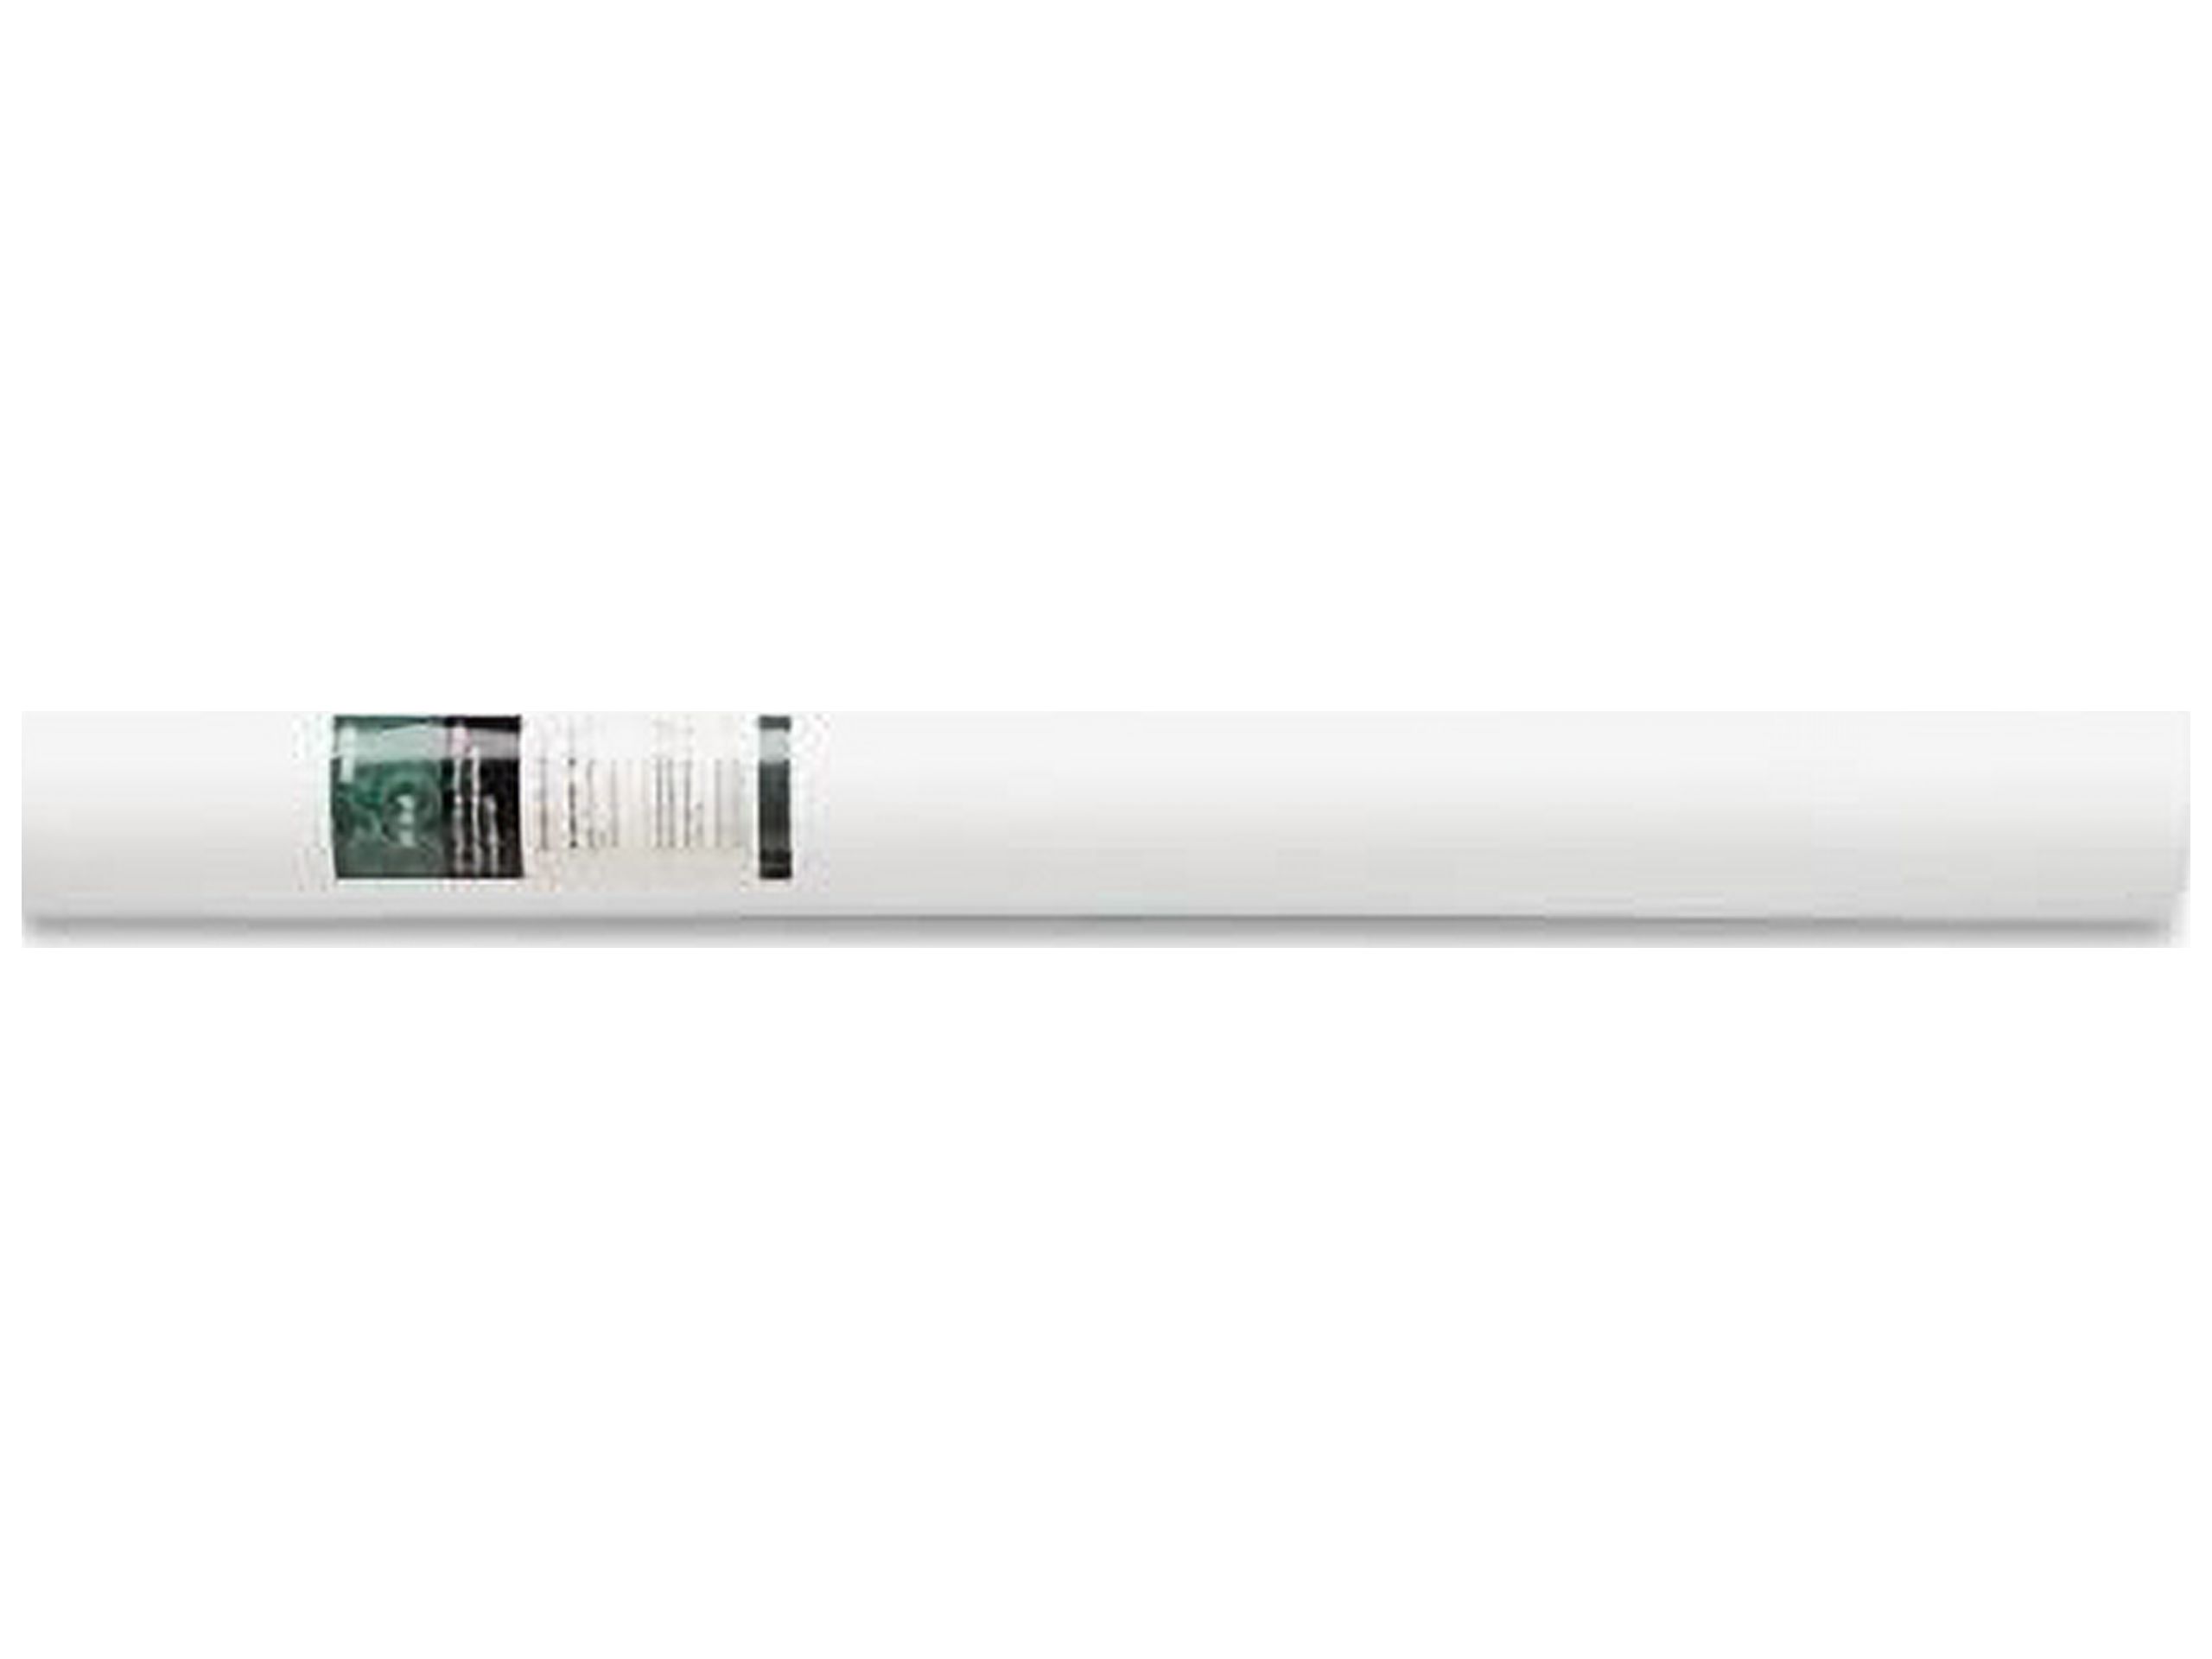 HP C6569C Heavyweight Coated Paper - 42" x 100' paper for HP designjets - 1 roll - image 1 of 3